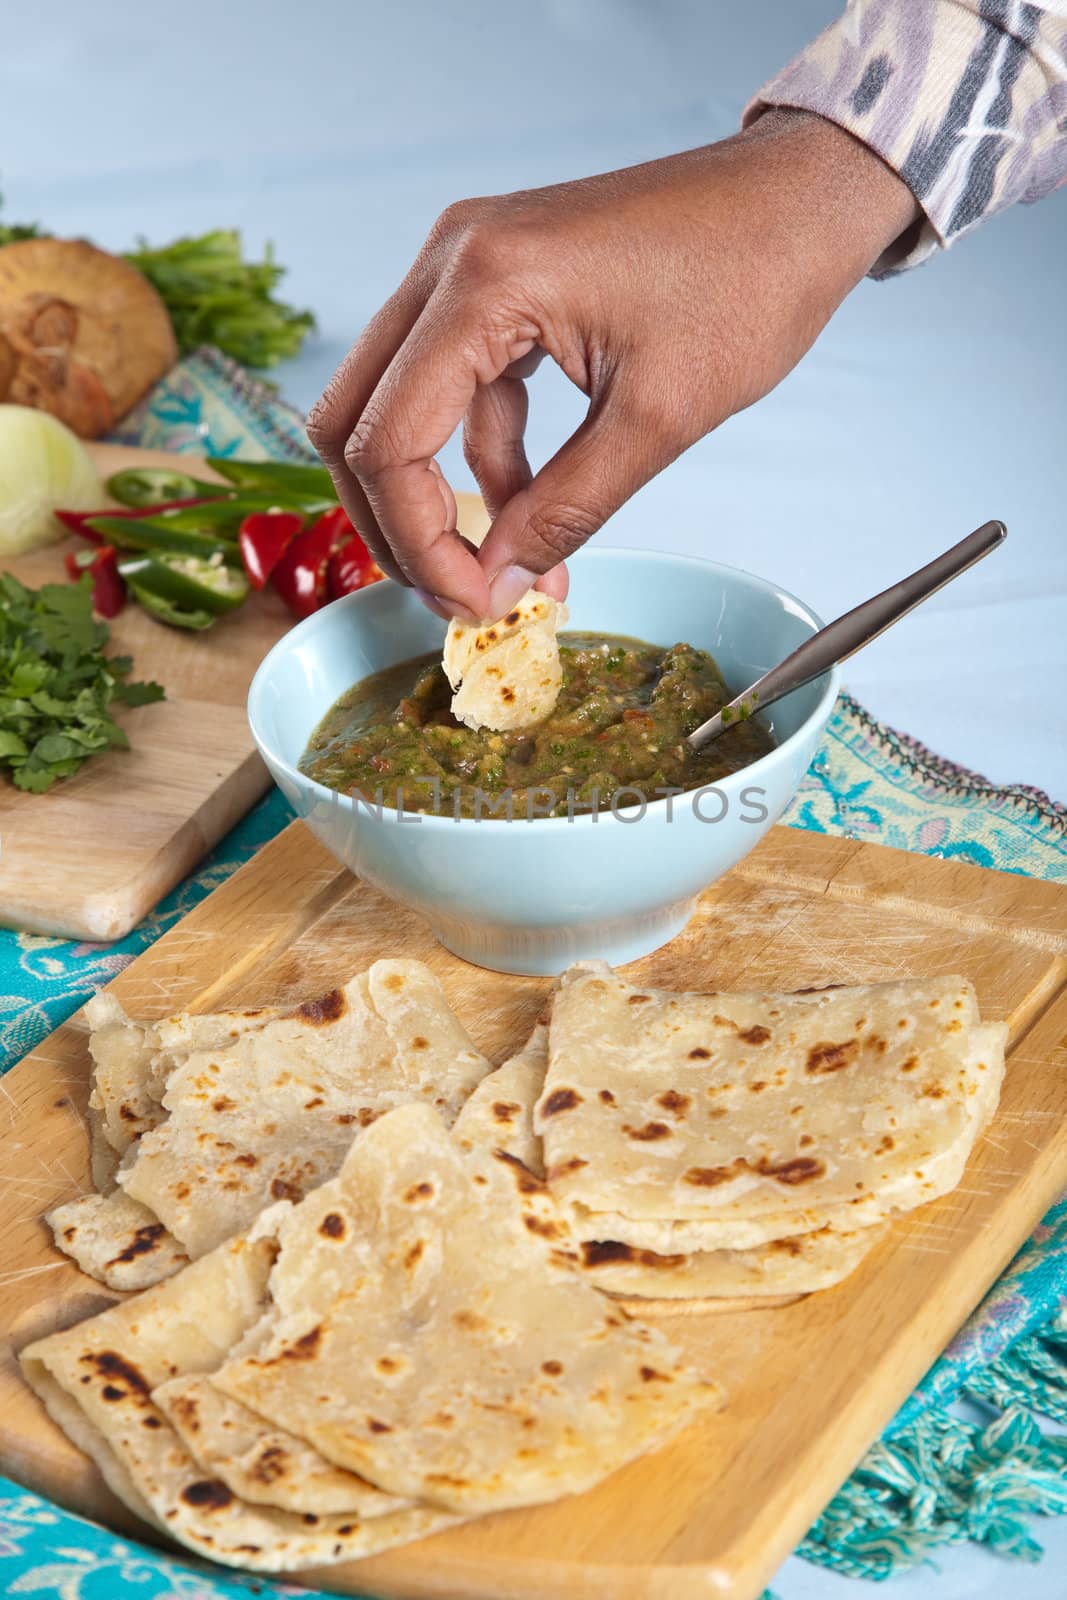 Typical indian style dip with roti bread and spicy tomato dip